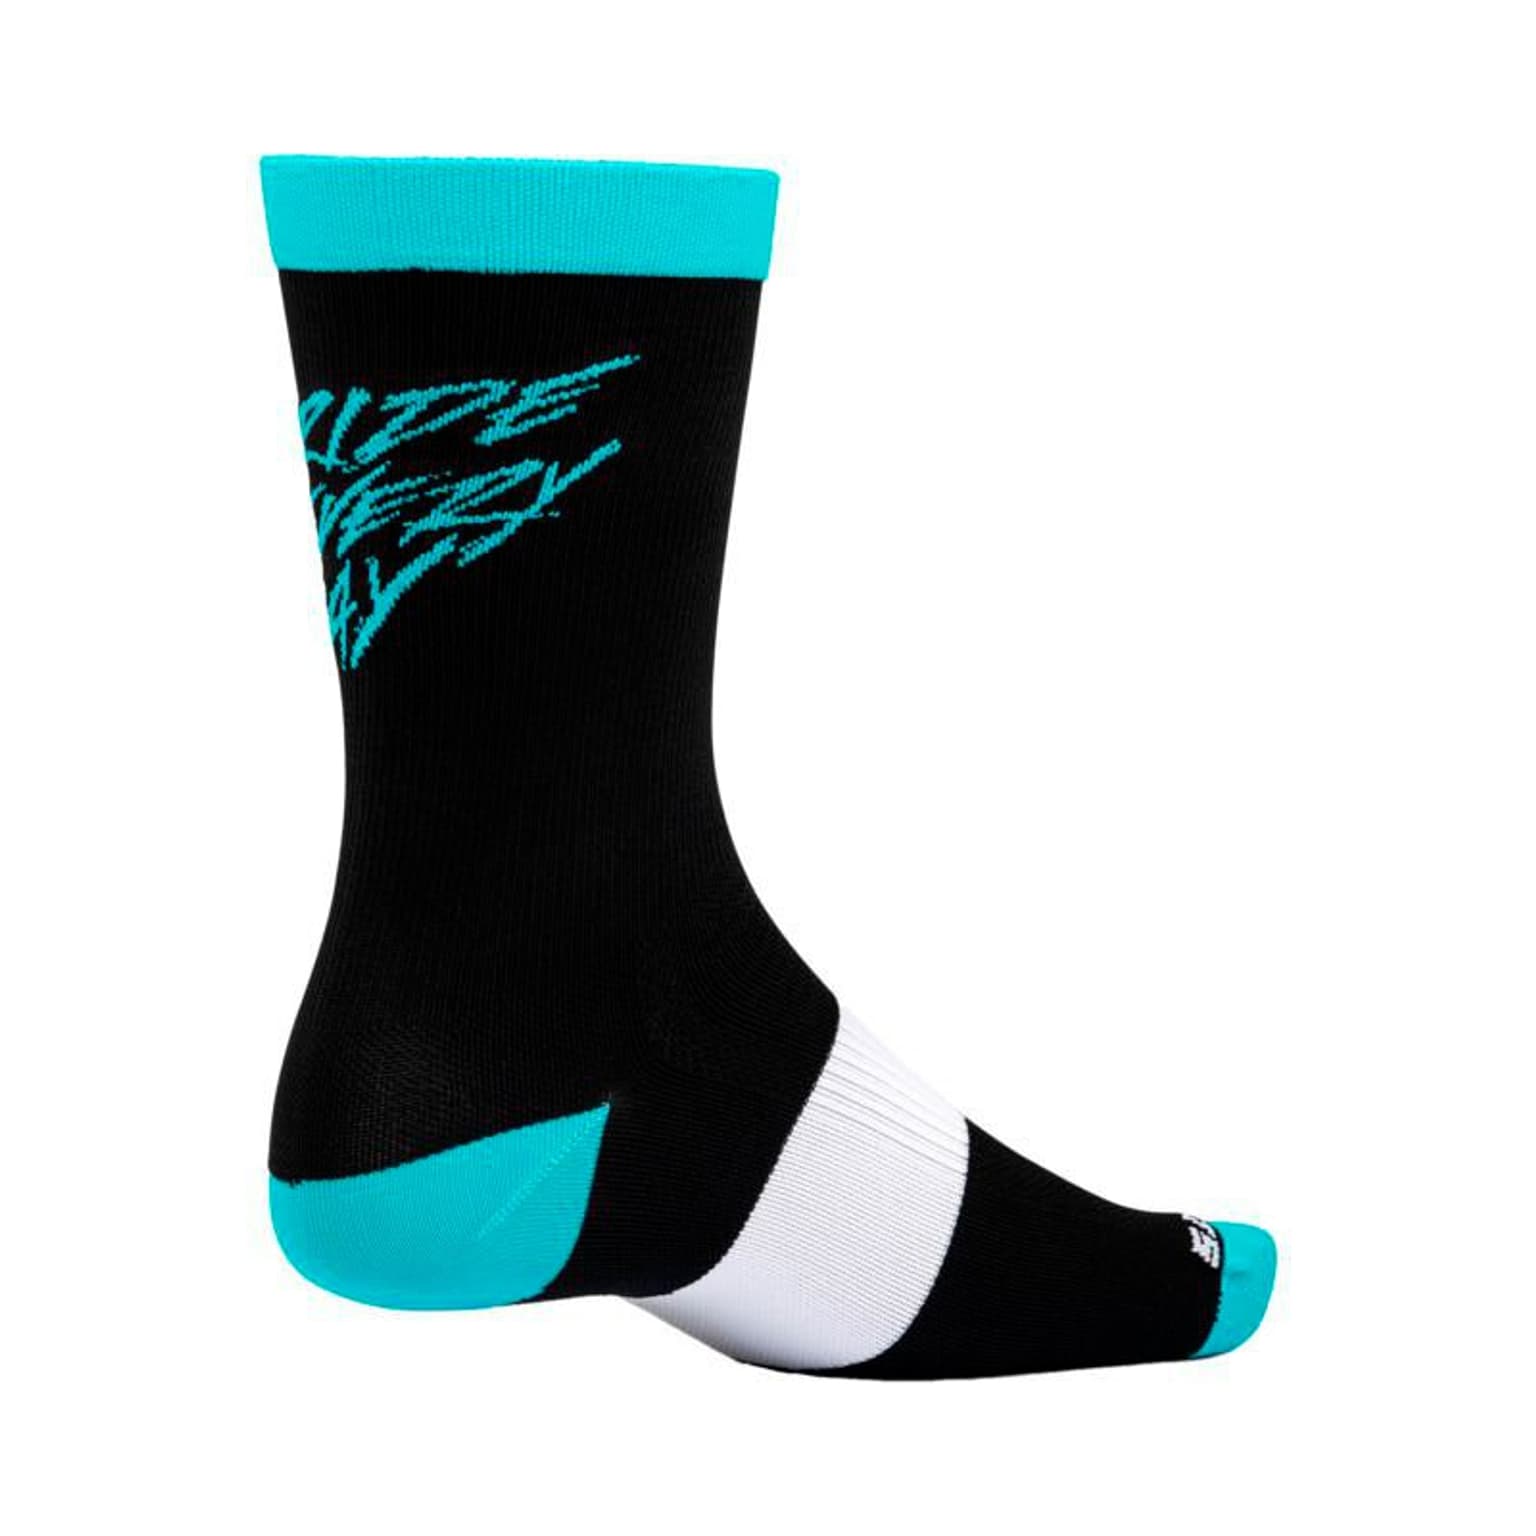 Ride Concepts Ride Concepts Ride Every Day Synthetic Velosocken tuerkis 1